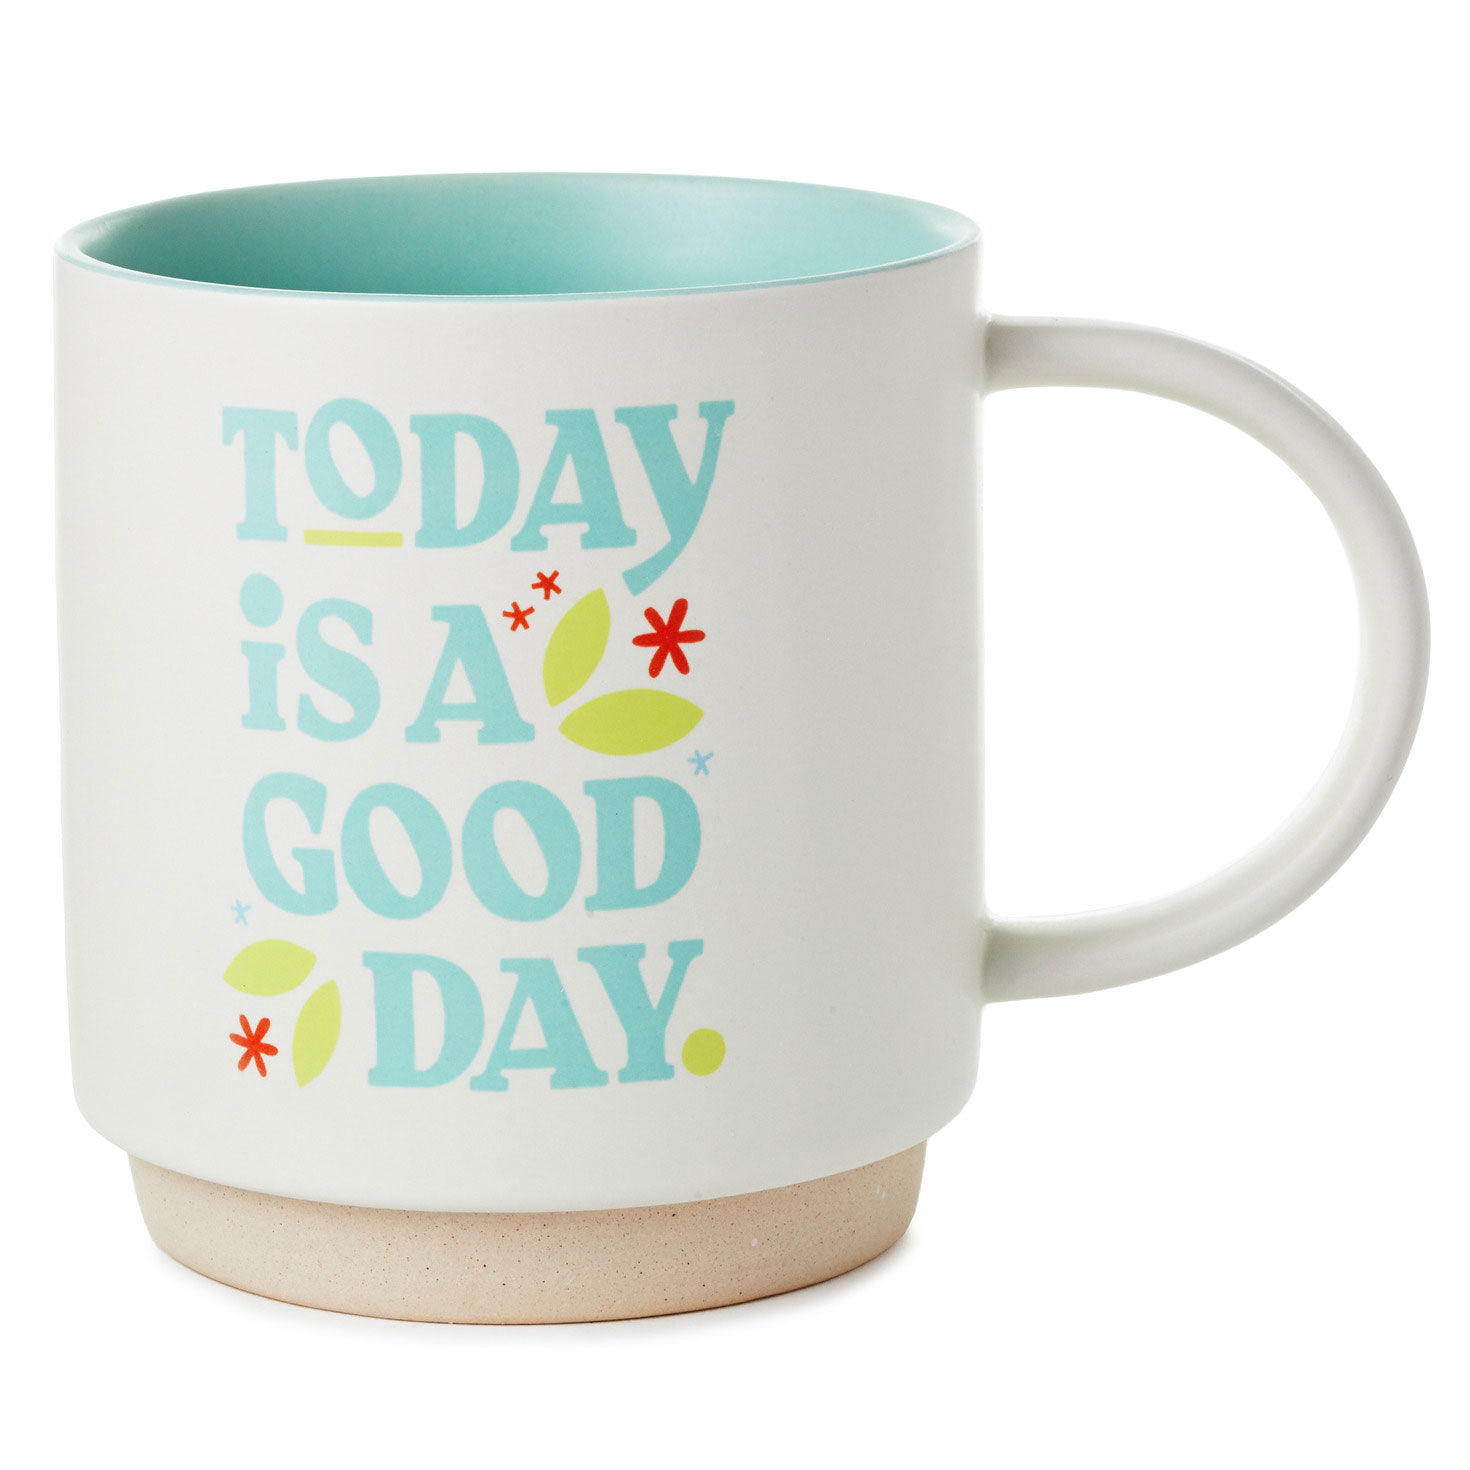 Today Is a Good Day Mug, 16 oz. for only USD 16.99 | Hallmark